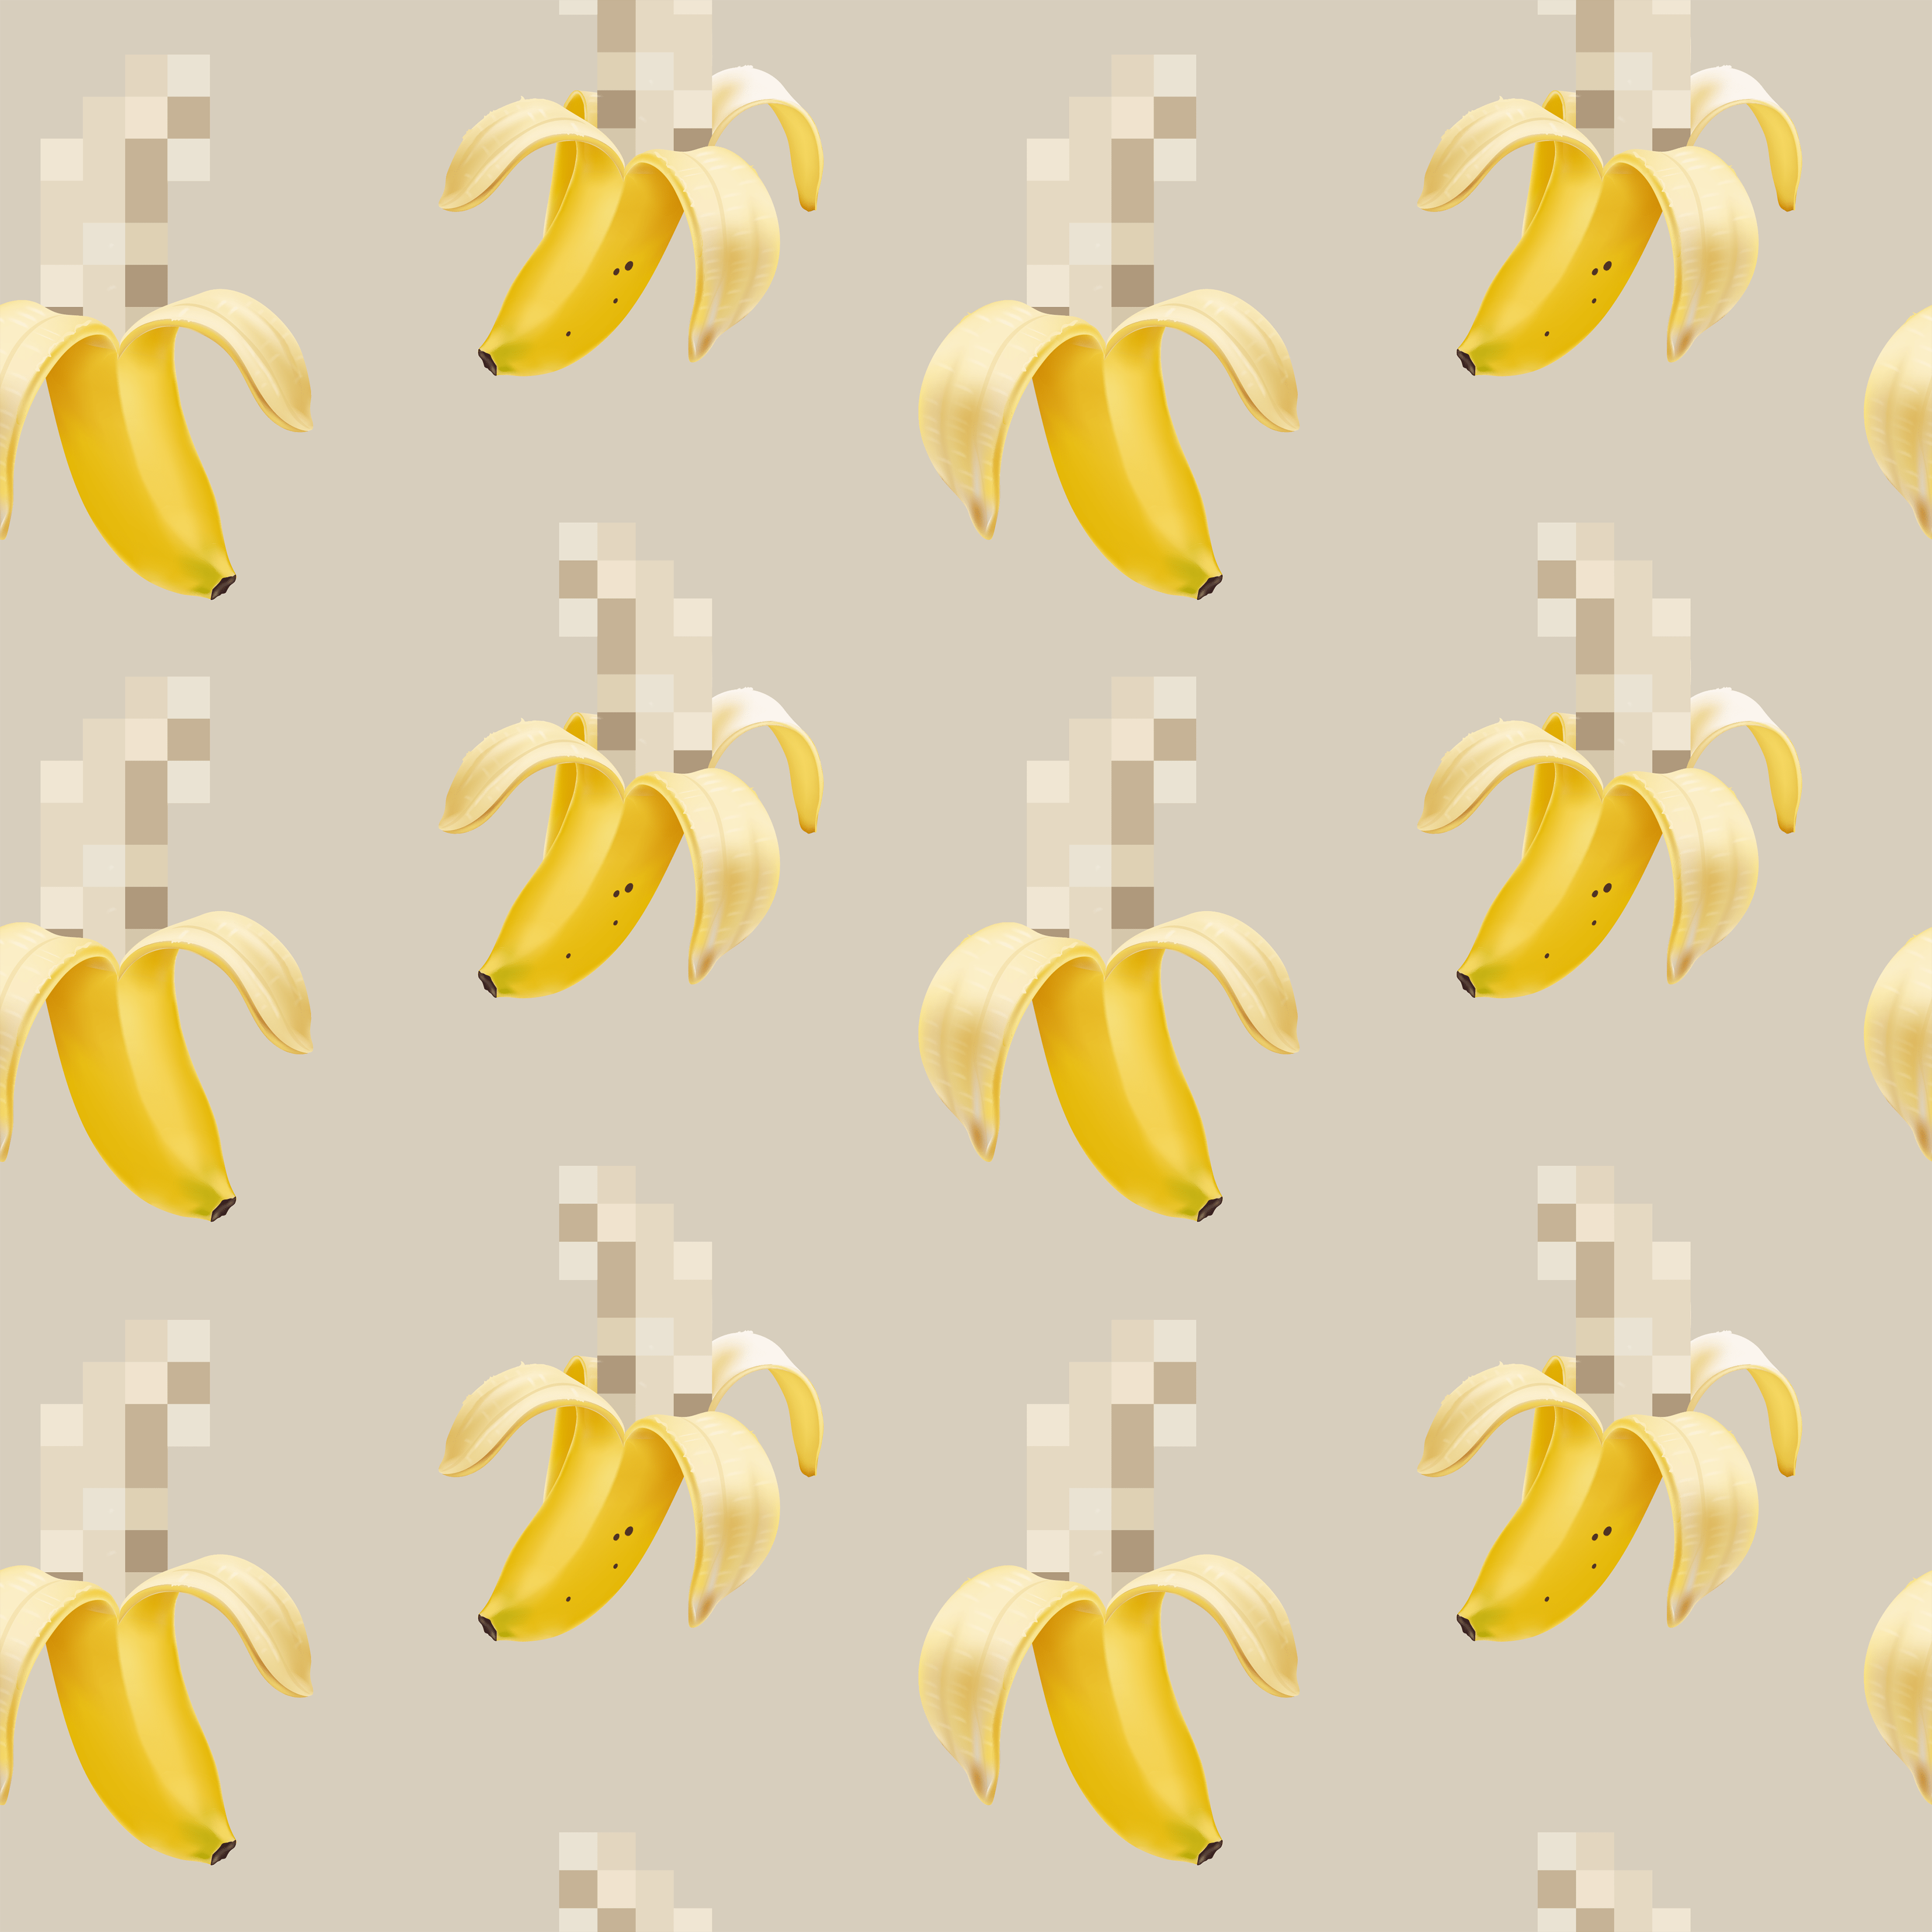 A pattern of bananas and squares on a beige background - Food, banana